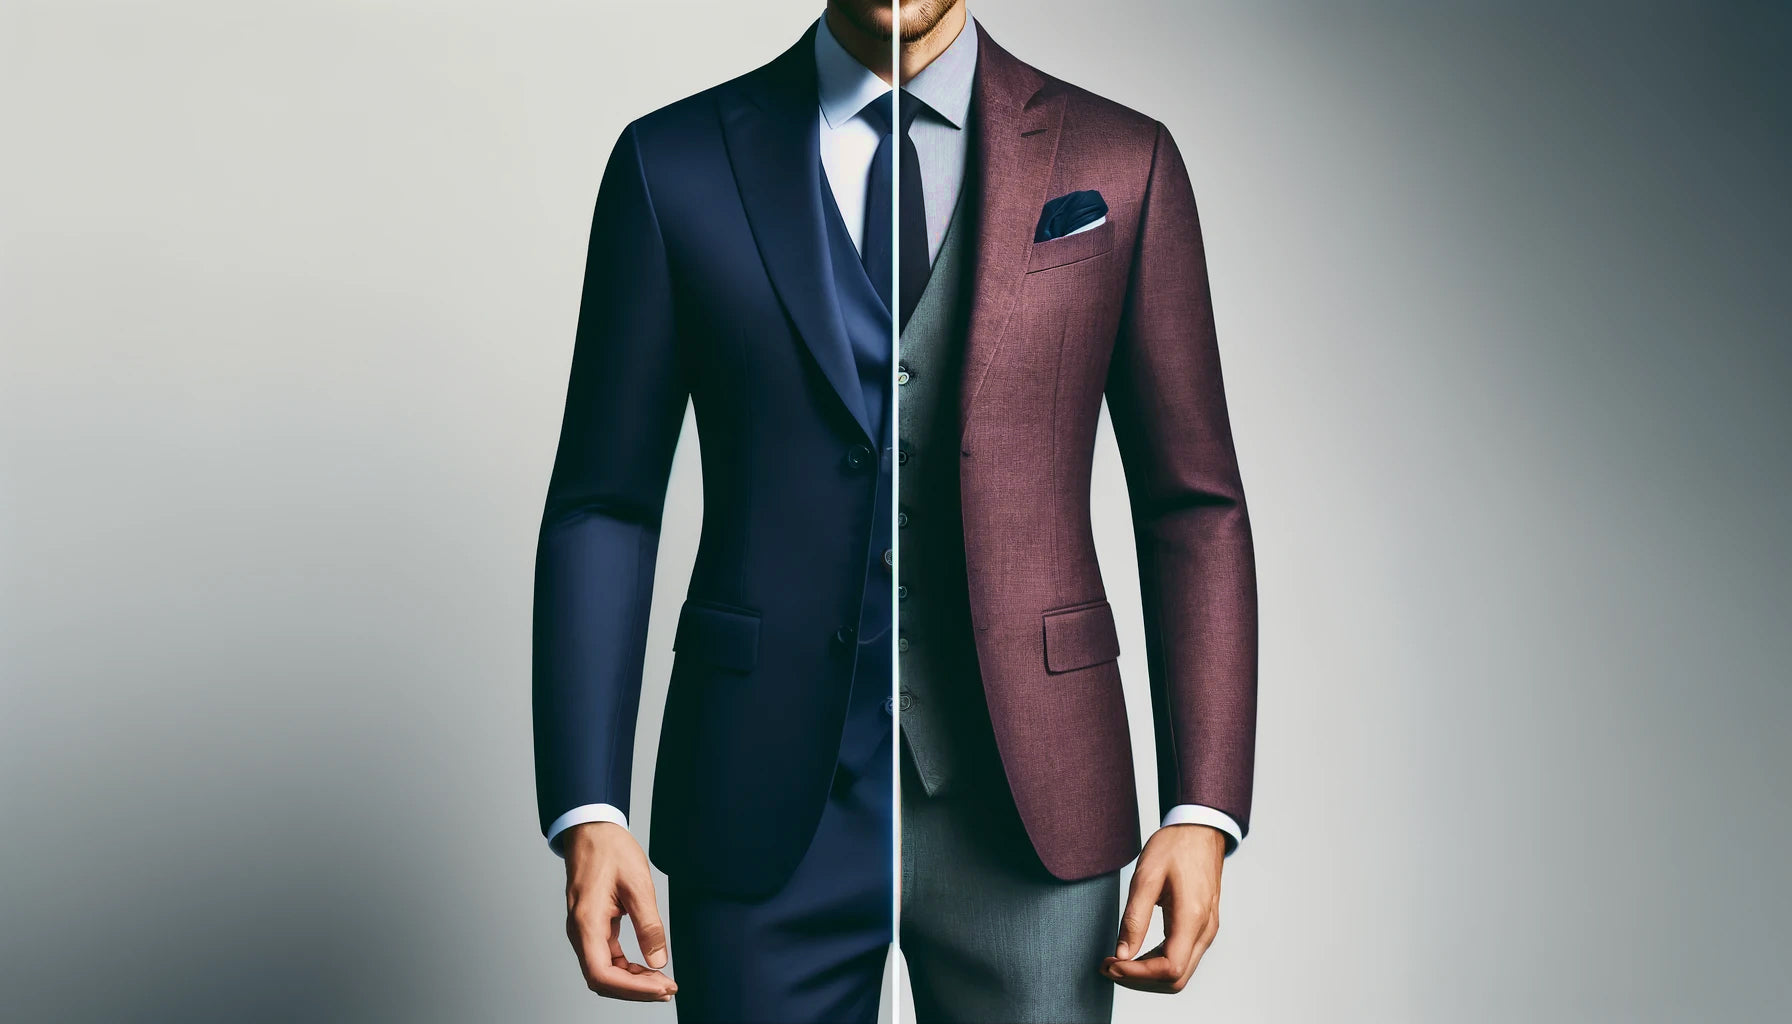 The Versatility of Bespoke Tailored Clothing